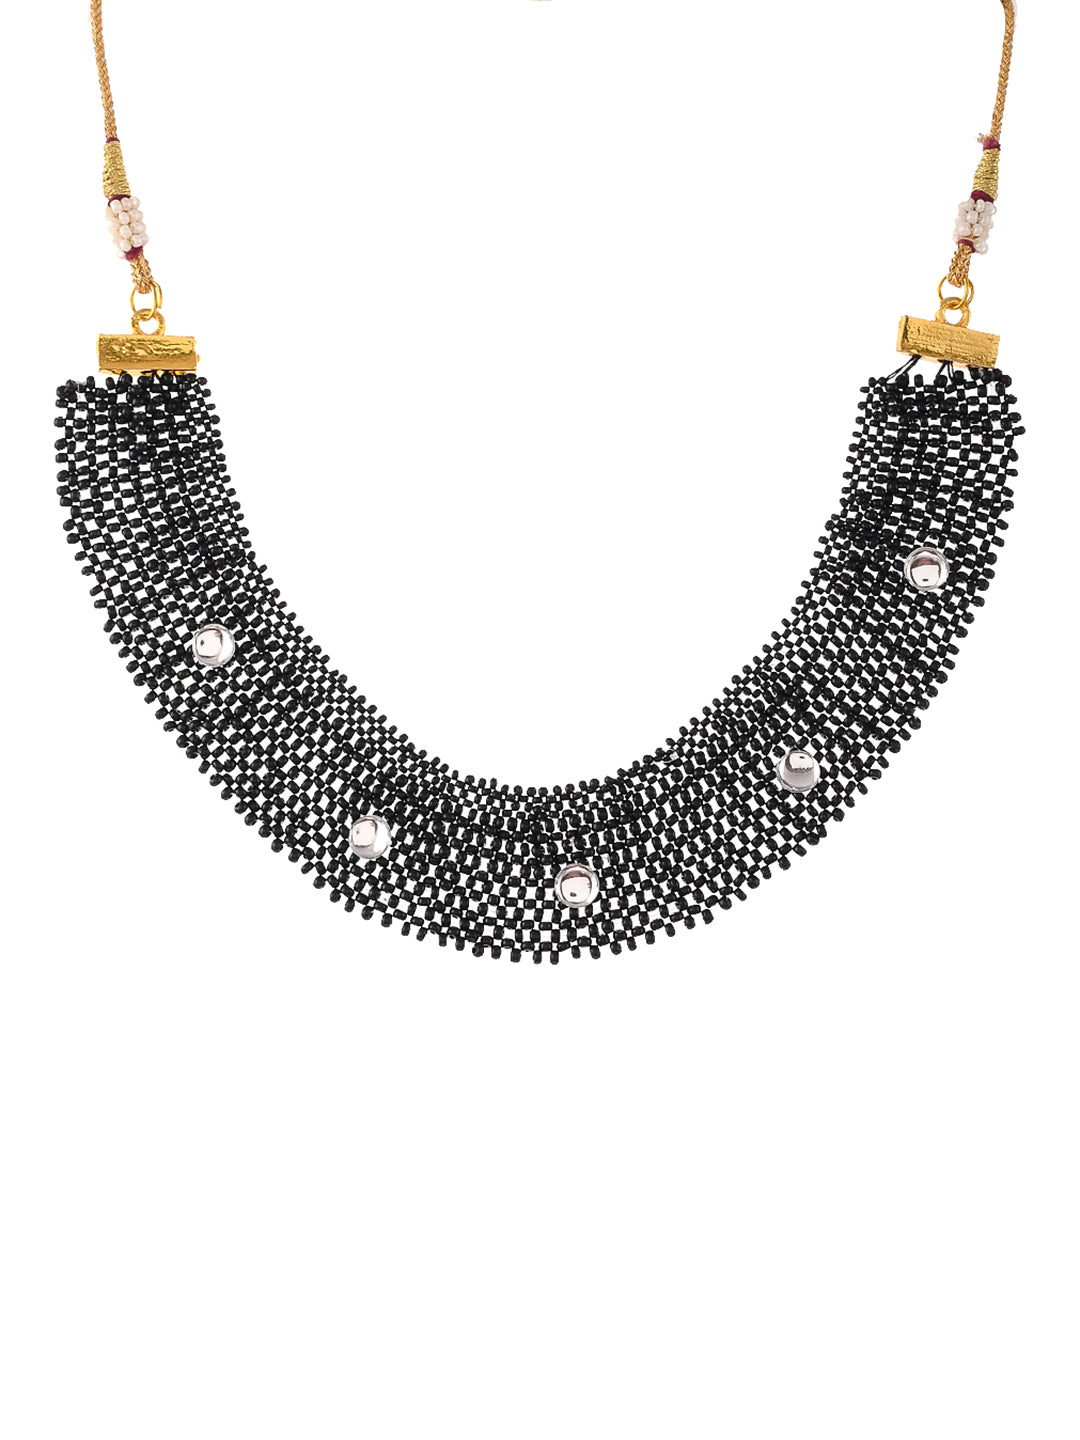 Gold Plated Black Beads Choker Necklace